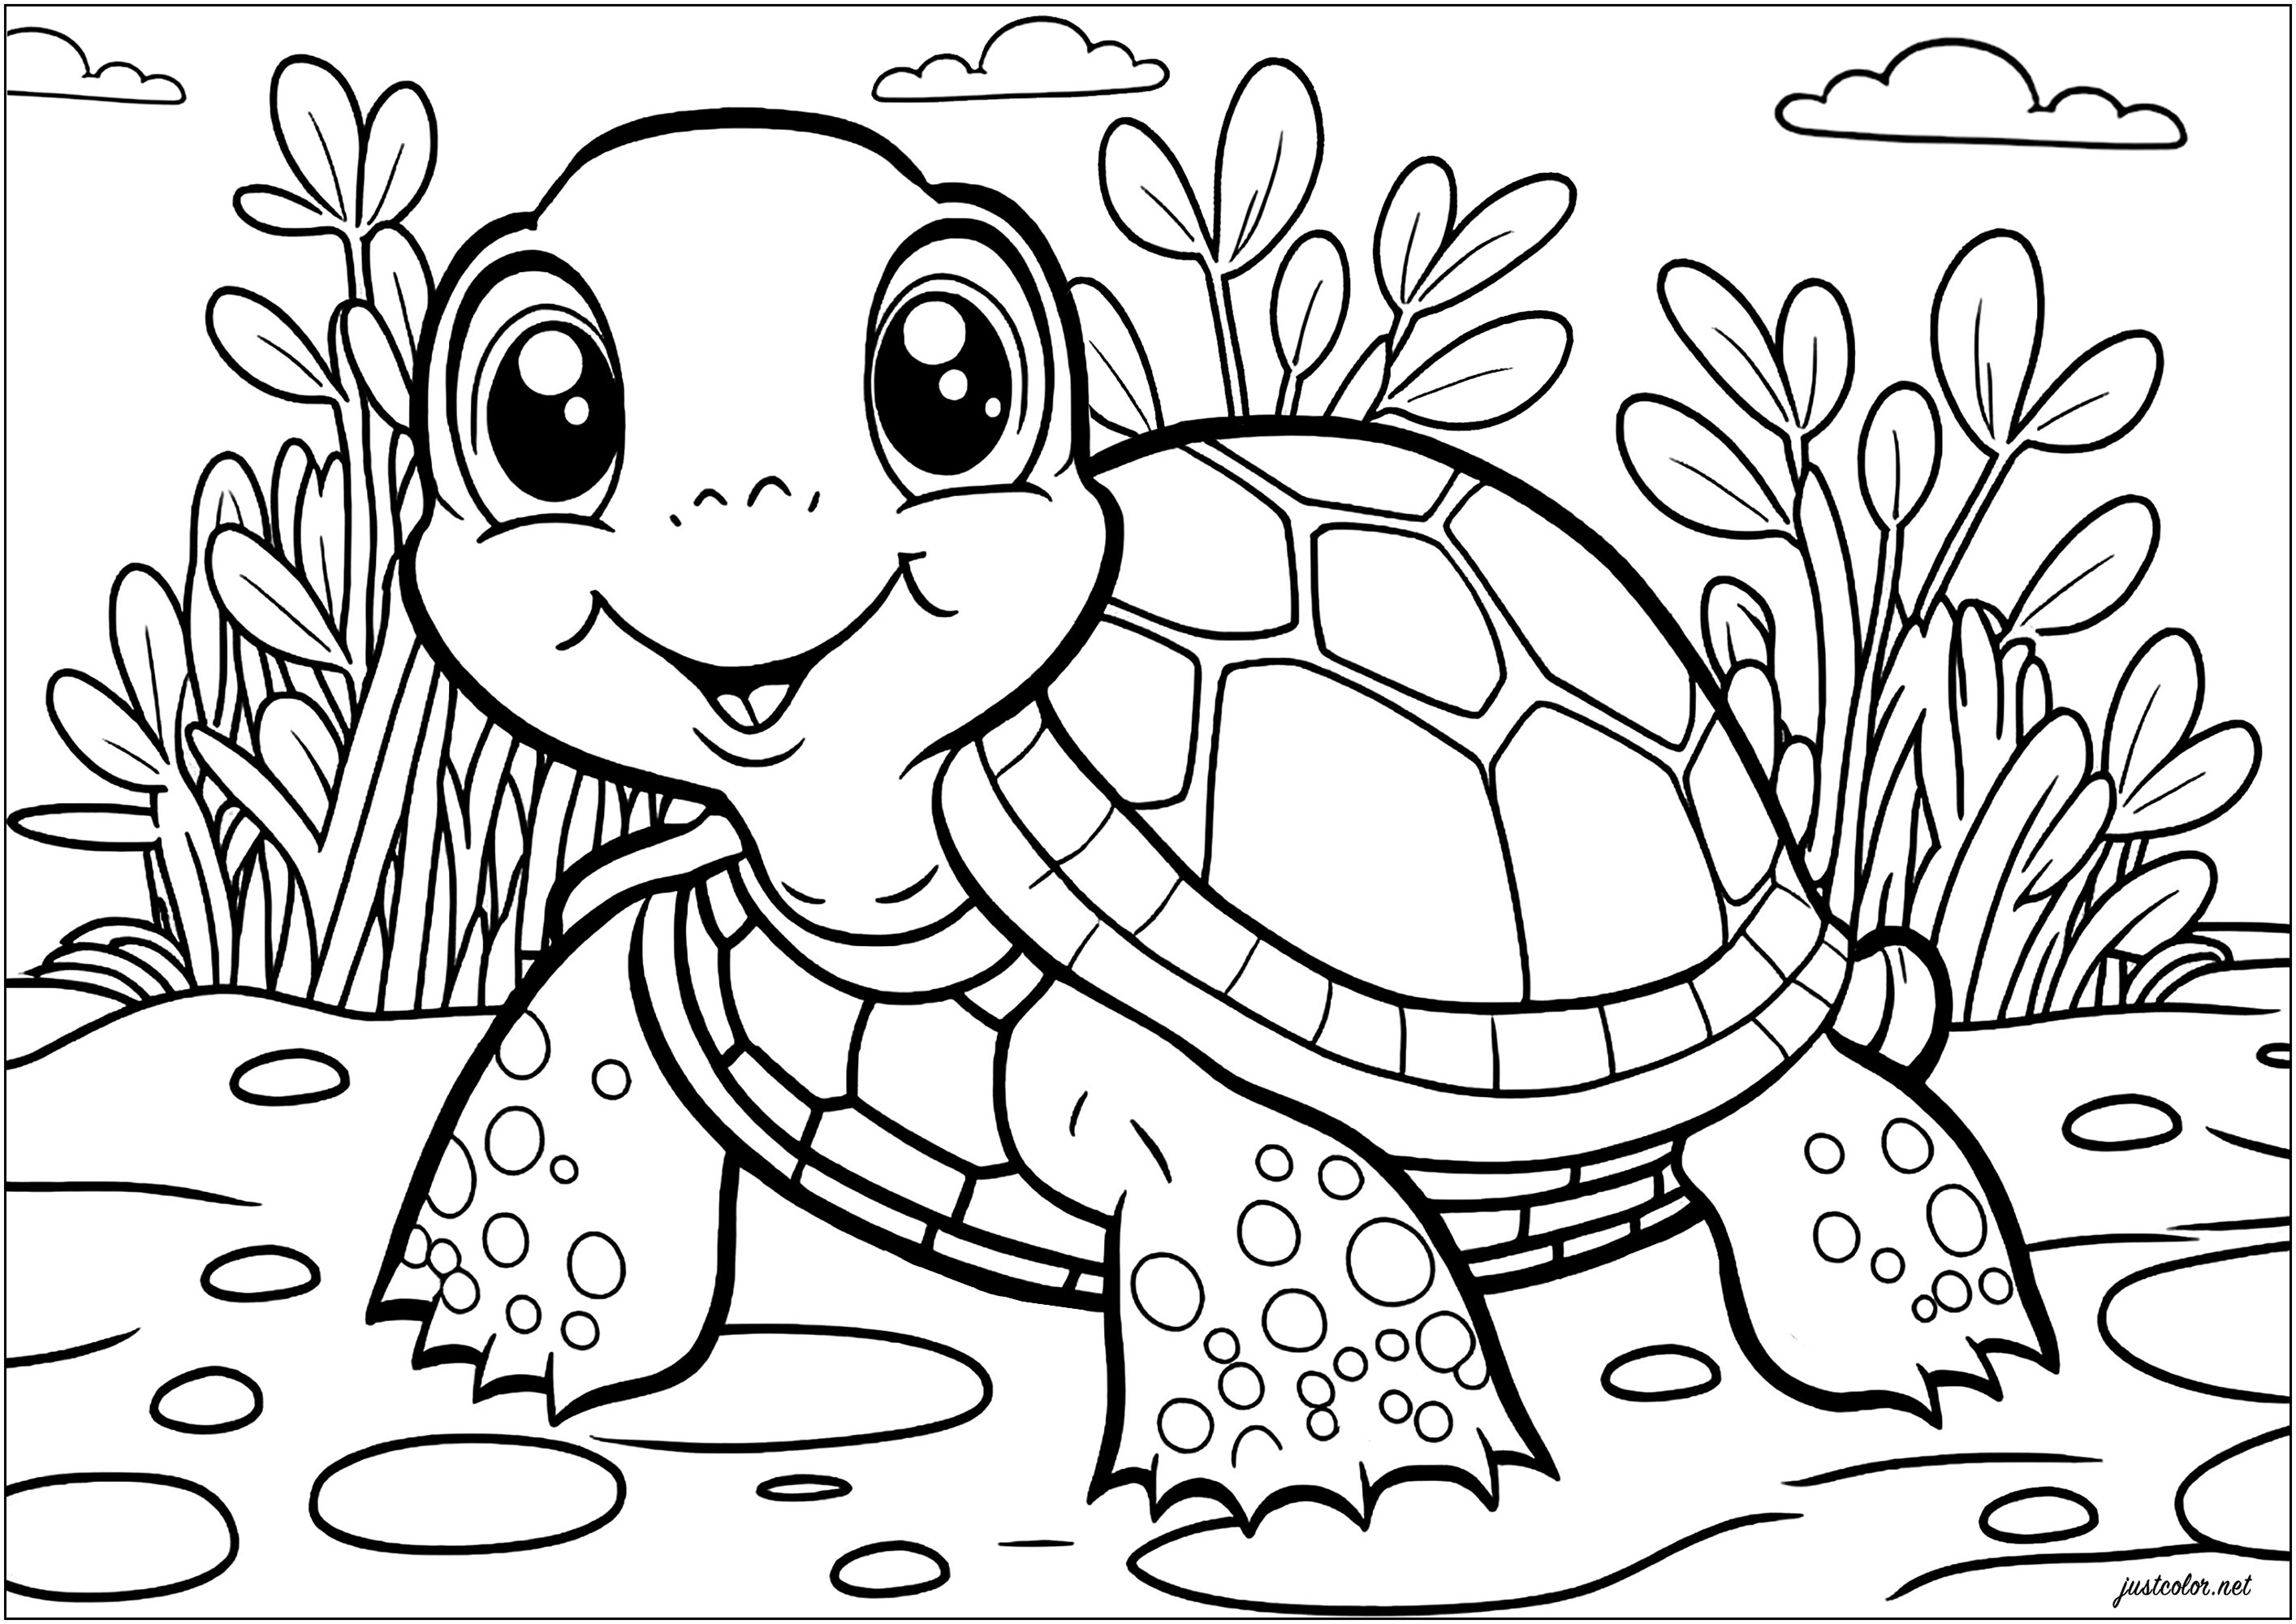 Smiling tortoise to color. Draw the natural world around this smiling tortoise with your creativity and favorite colors. A coloring page with a very childish appearance, but full of details